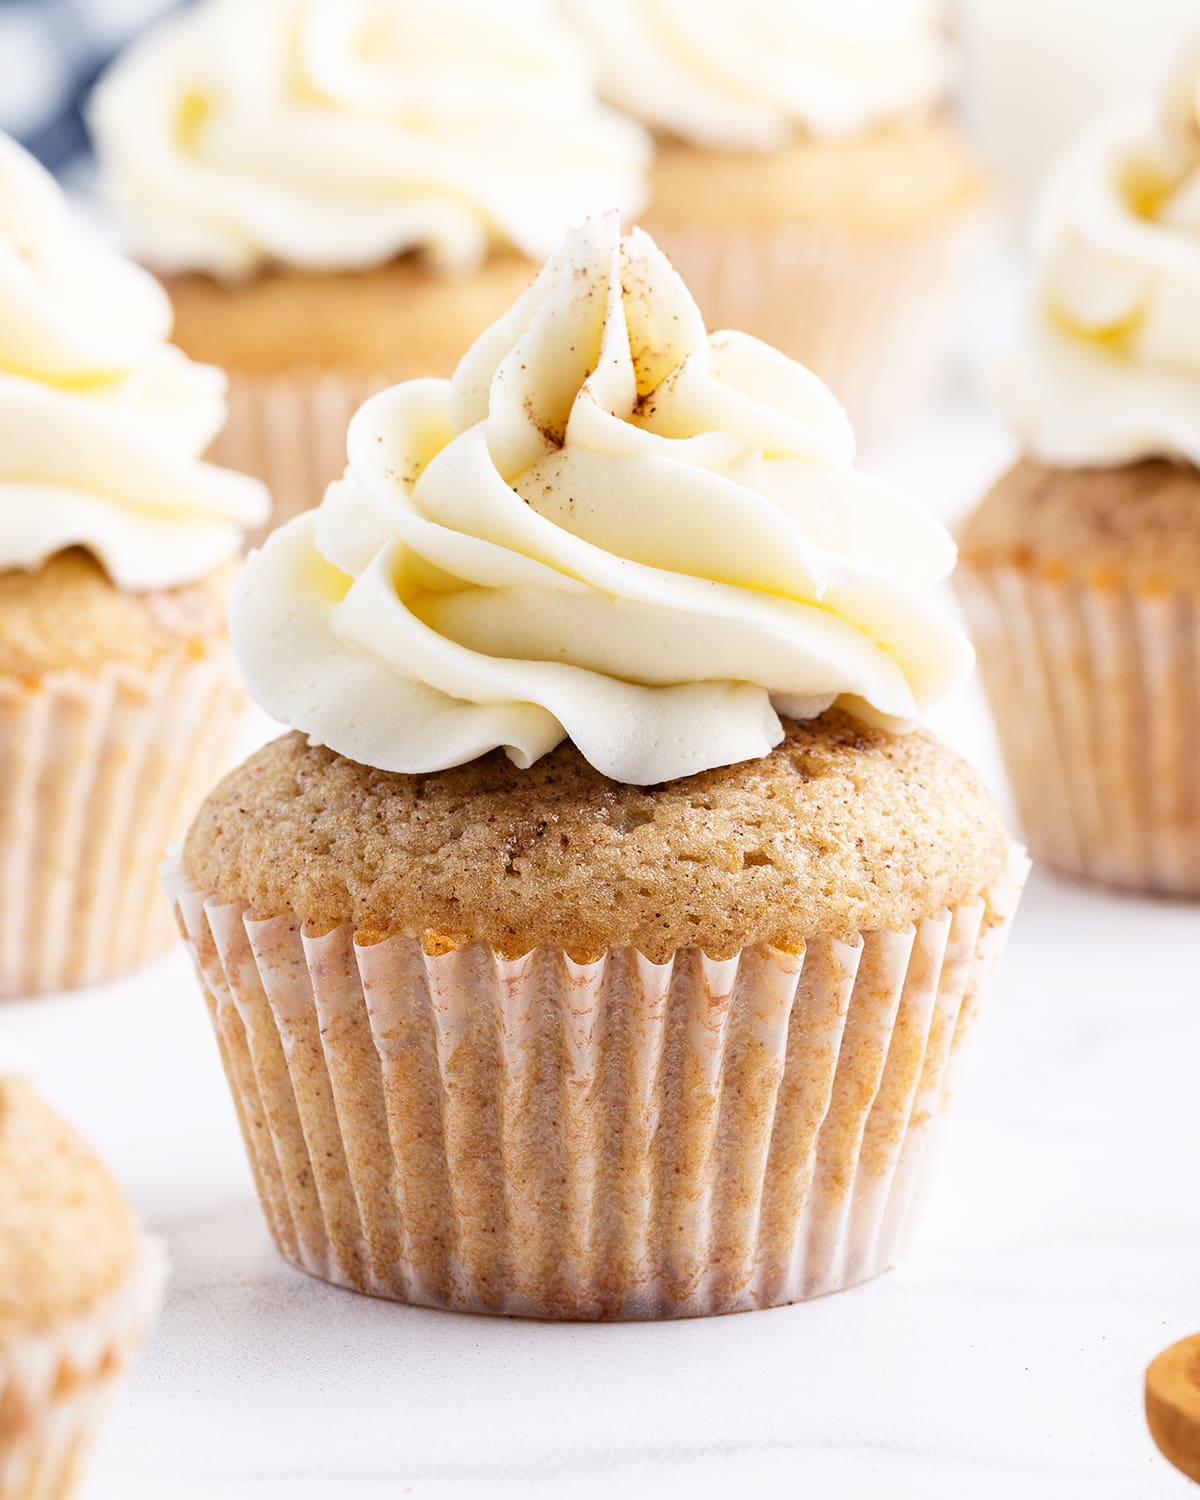 A close up of a cupcake topped with a white buttercream and sprinkled with cinnamon.